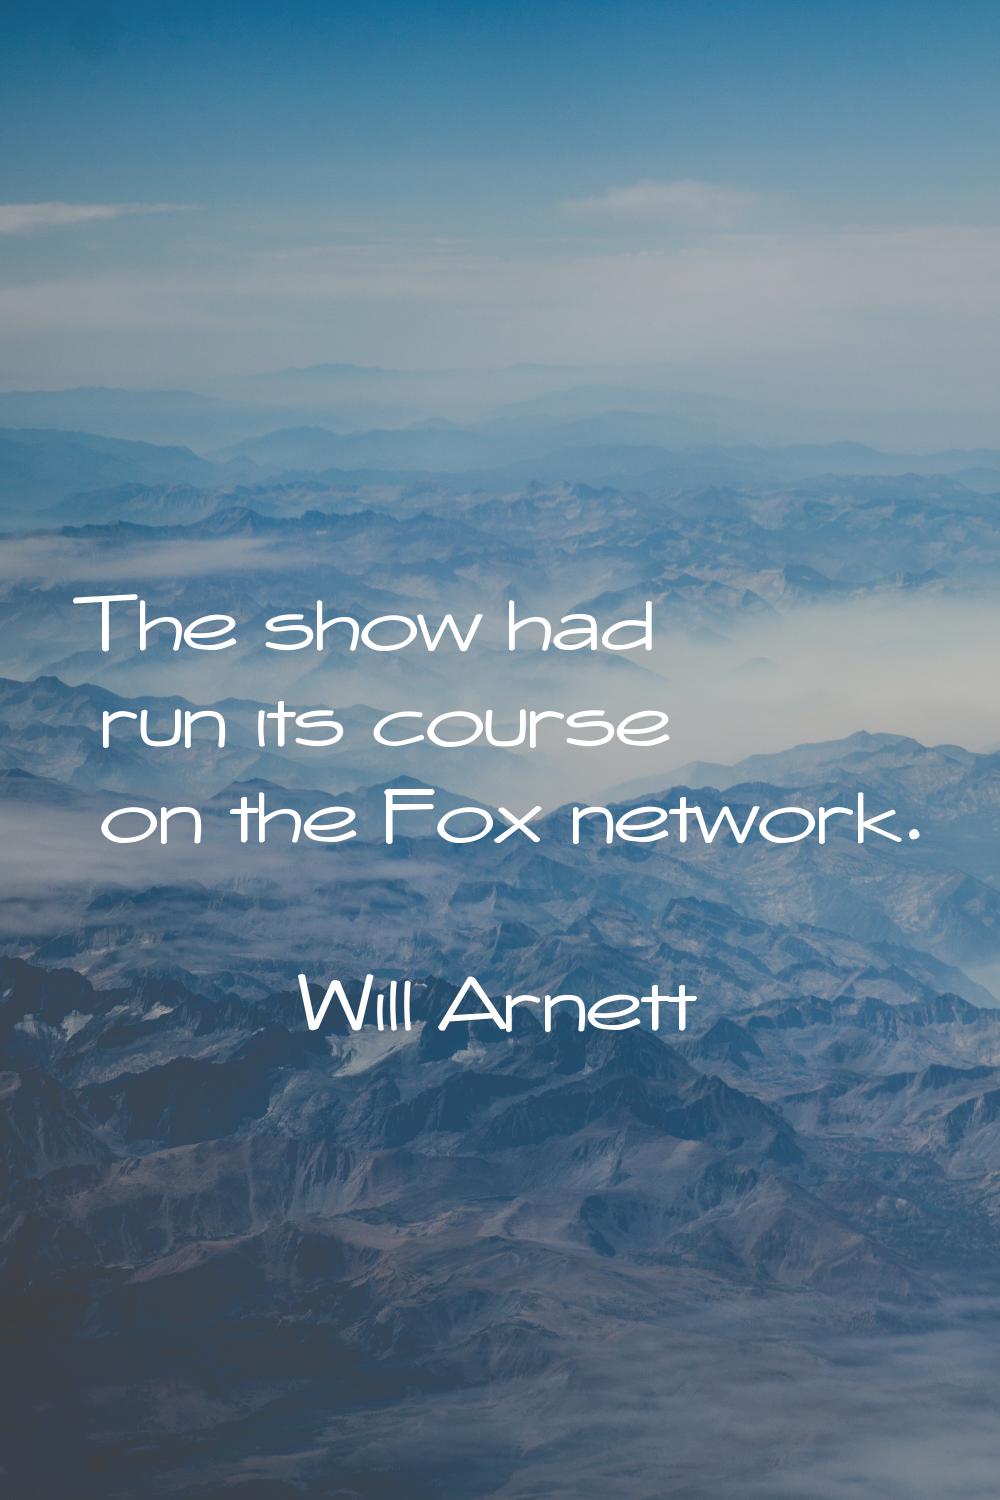 The show had run its course on the Fox network.